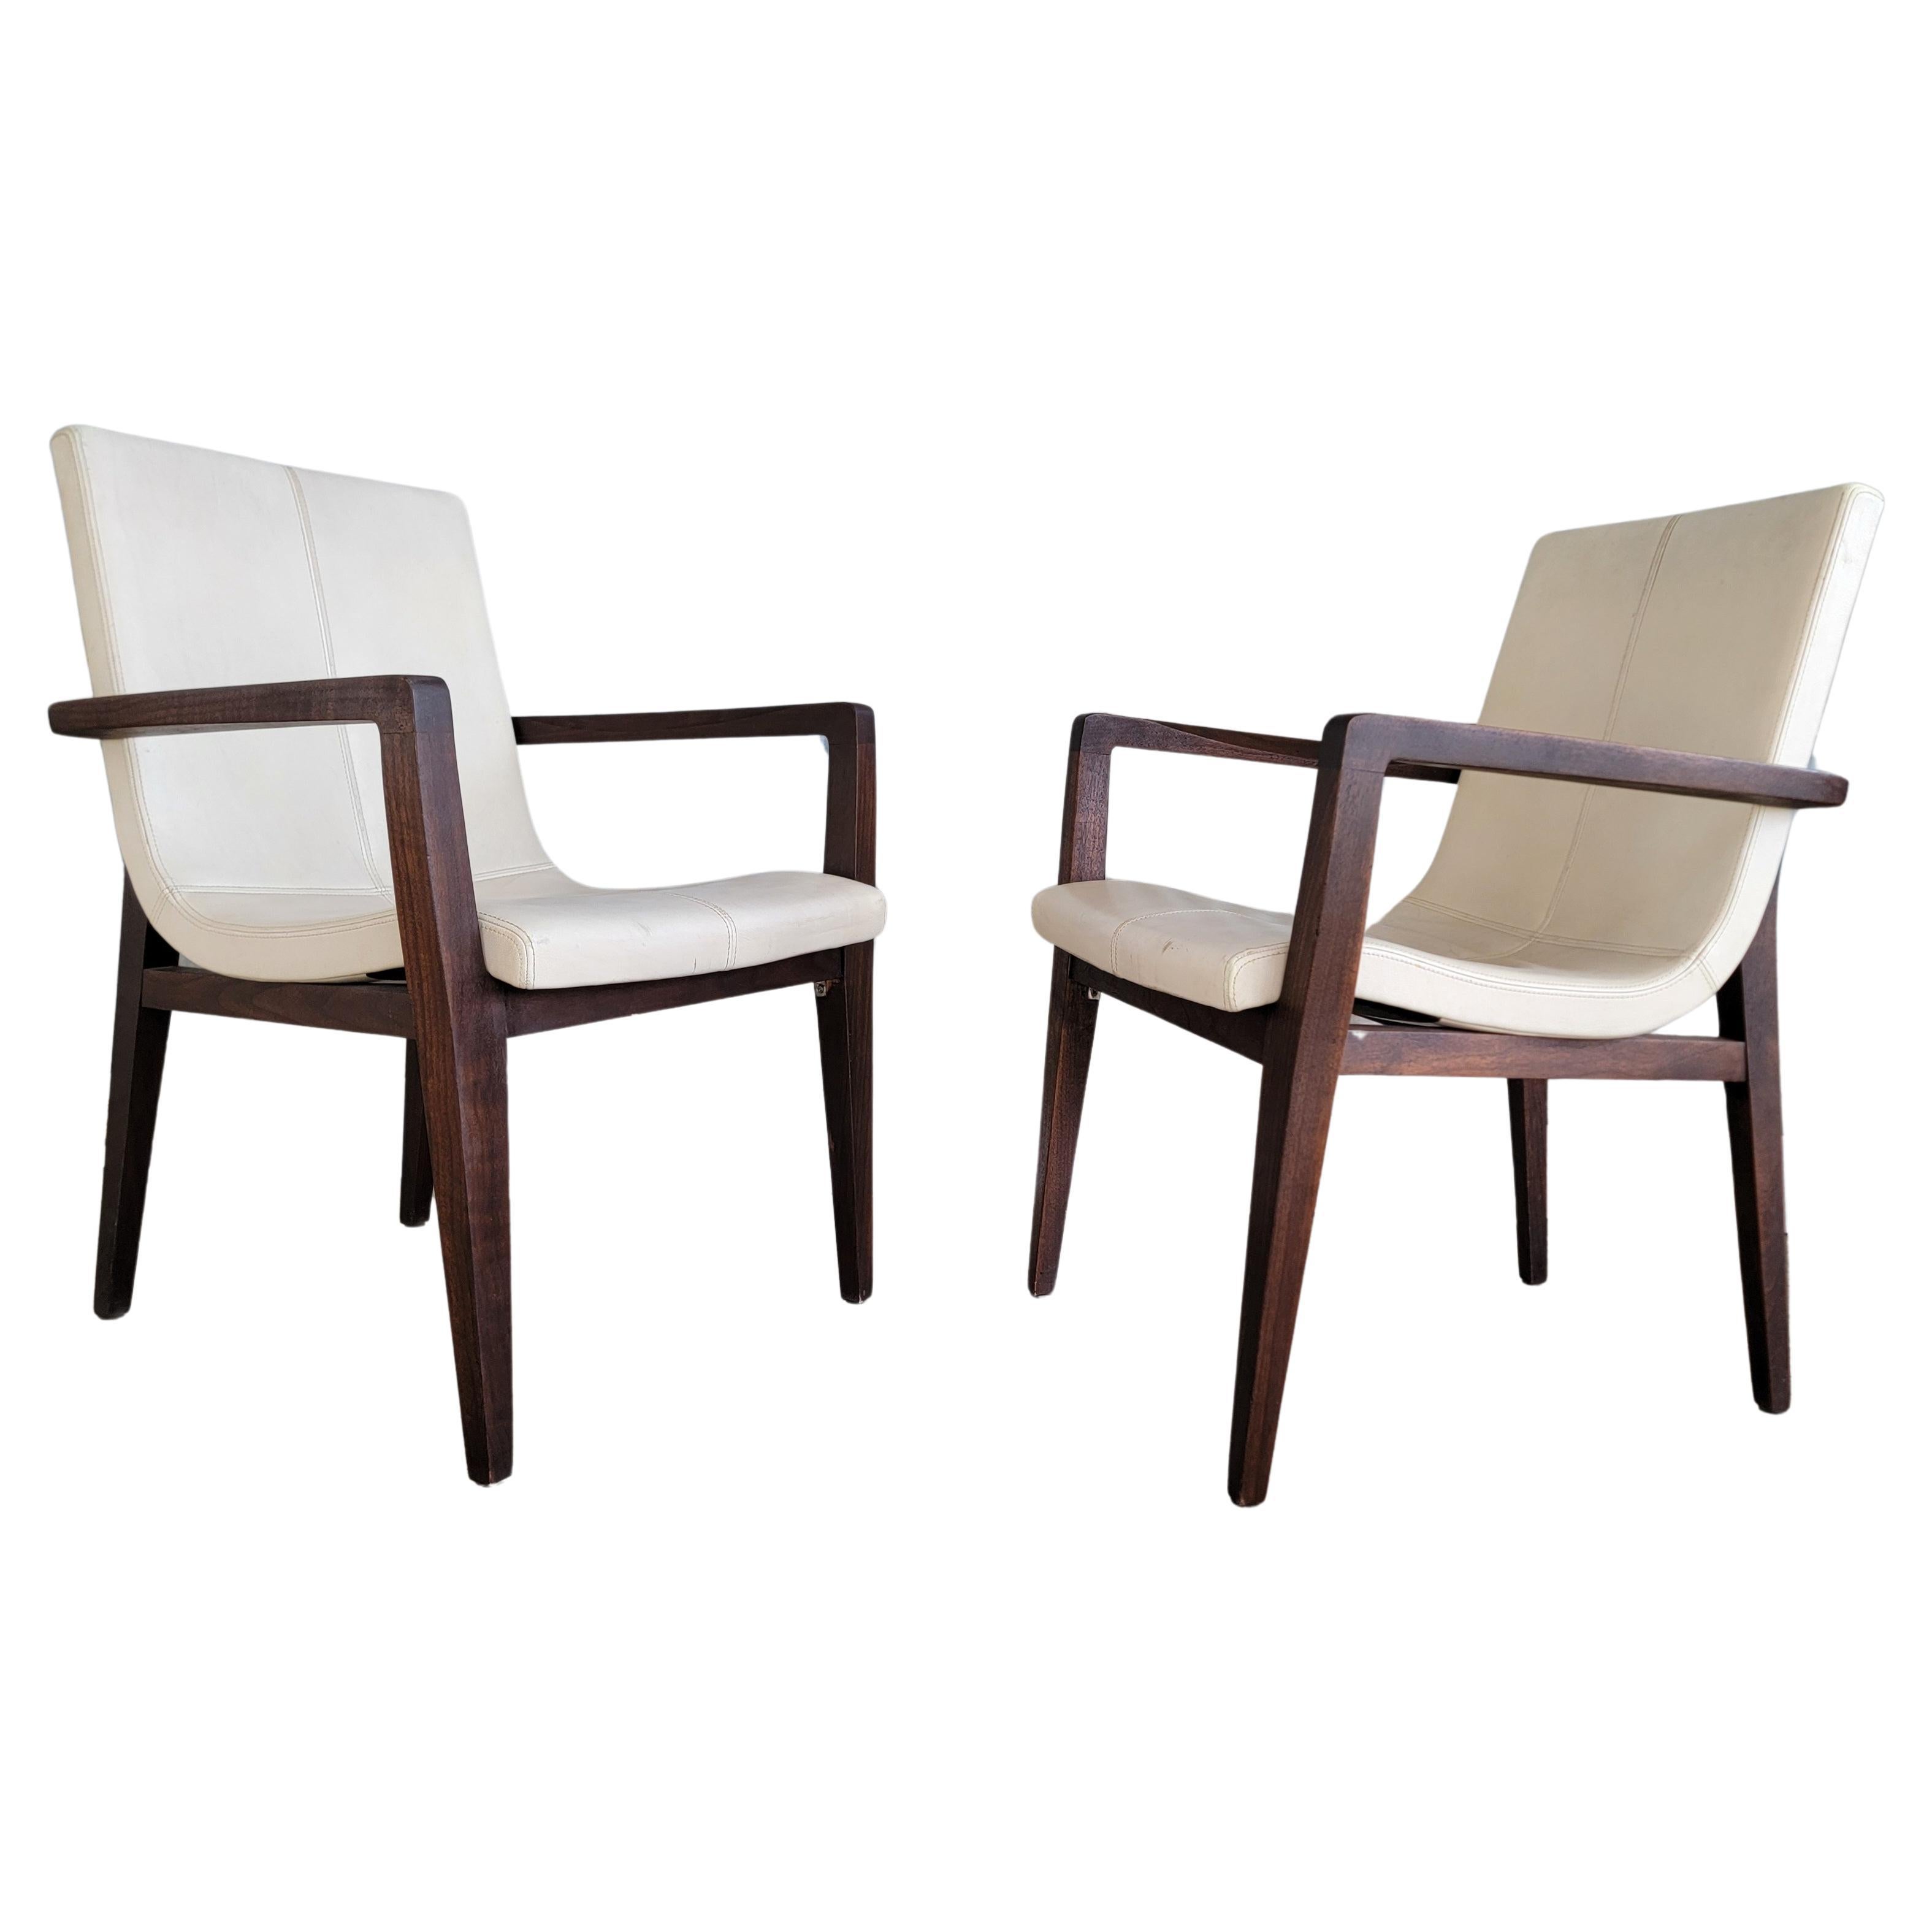 A pair of leather Siren dining armchairs by Holly Hunt. Scoop seat design. Retaining Holly Hunt metal label. Original leather upholstery in good condition, but does have light scuffing and minor wear. Hardwood frames may have been touched up or